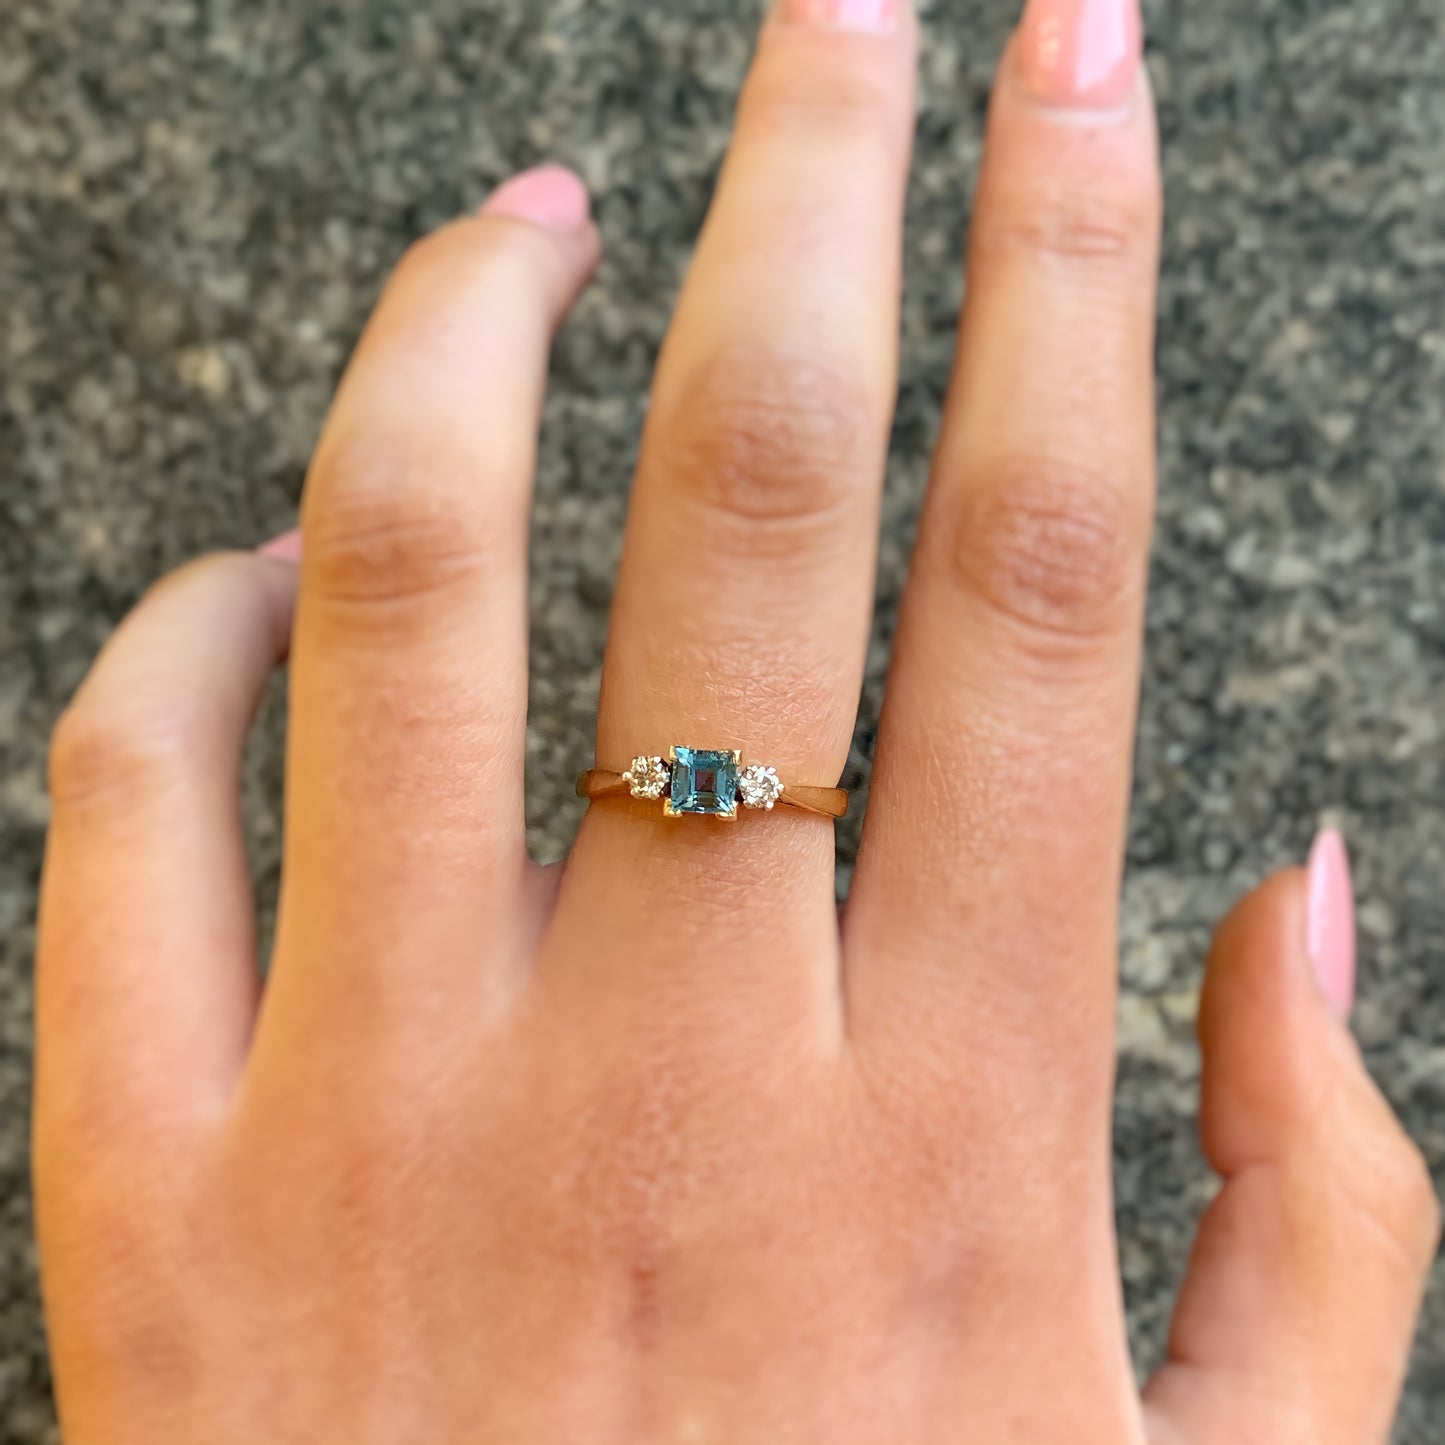 18ct Yellow Gold Vintage Reproduction Blue Topaz and Diamond Ring – Size M 1/2